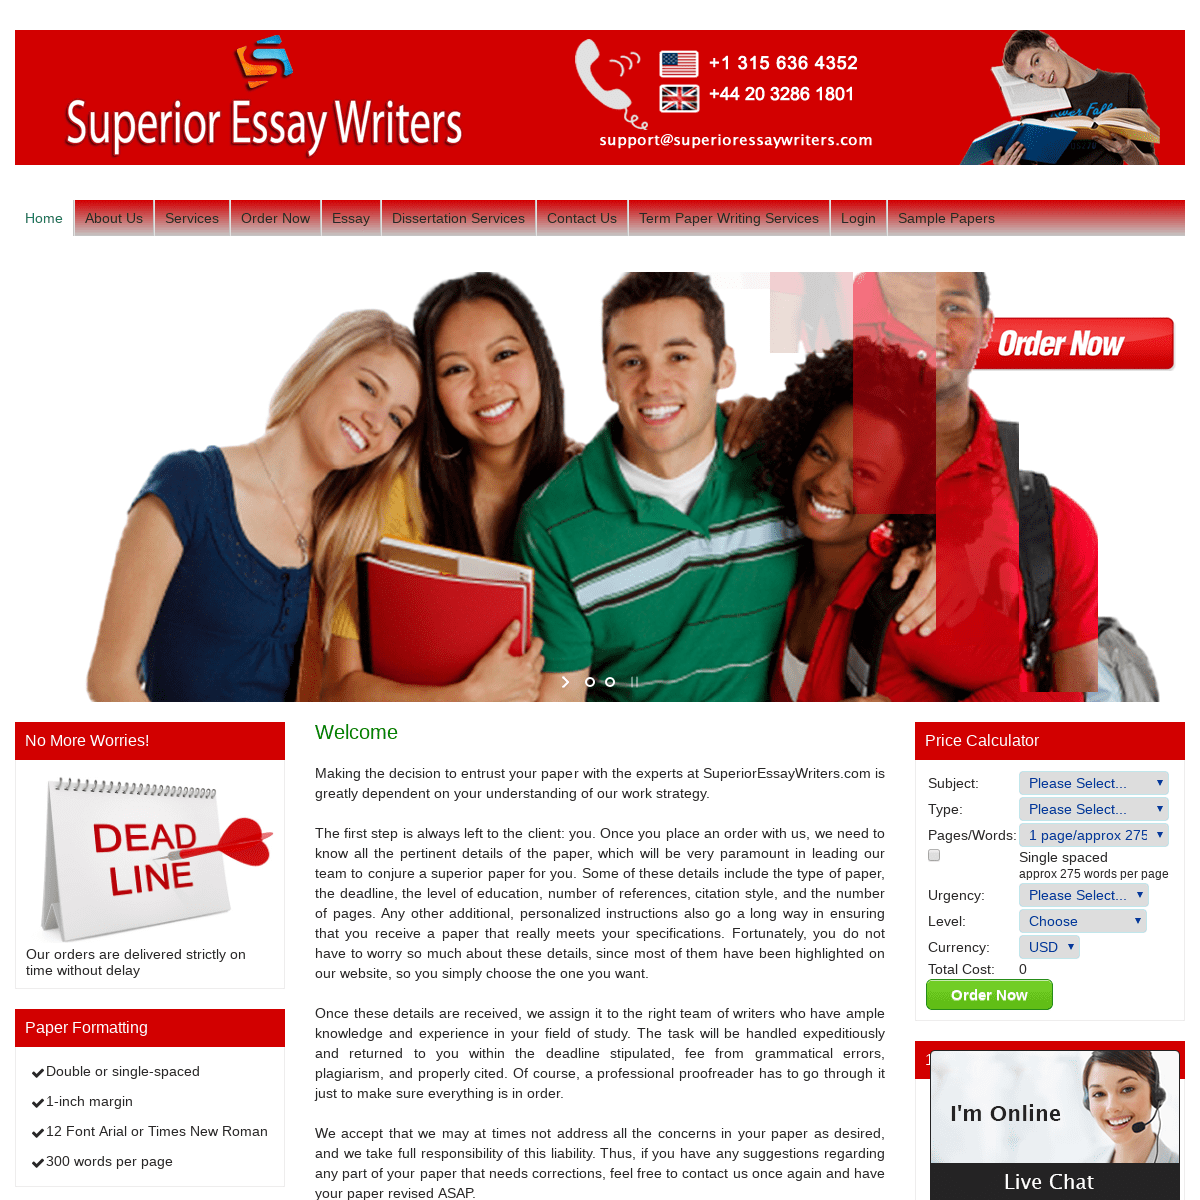 Superior Essay Writers | Custom Written Term Papers | Buy Essays Online Cheap